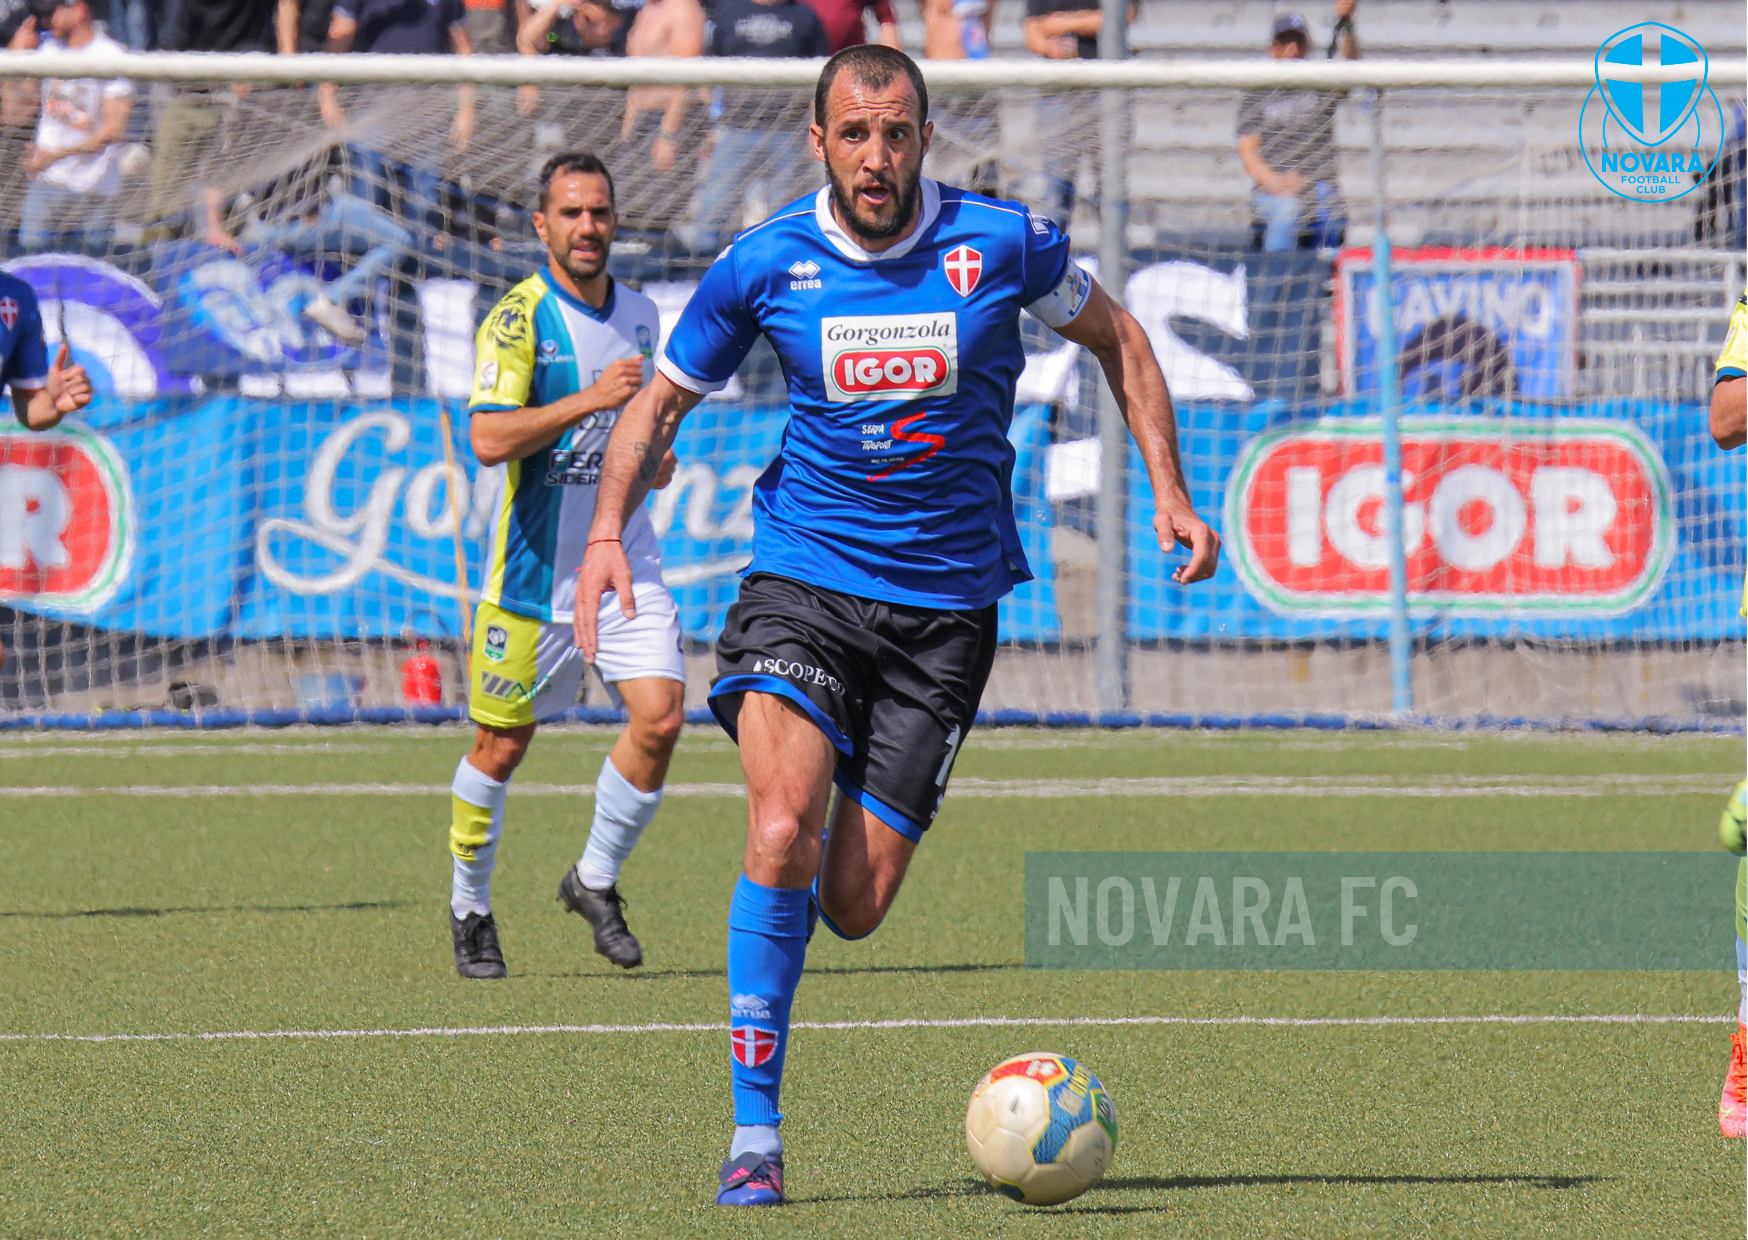 Read more about the article Novara-Feralpisalò 1-0 | Gallery